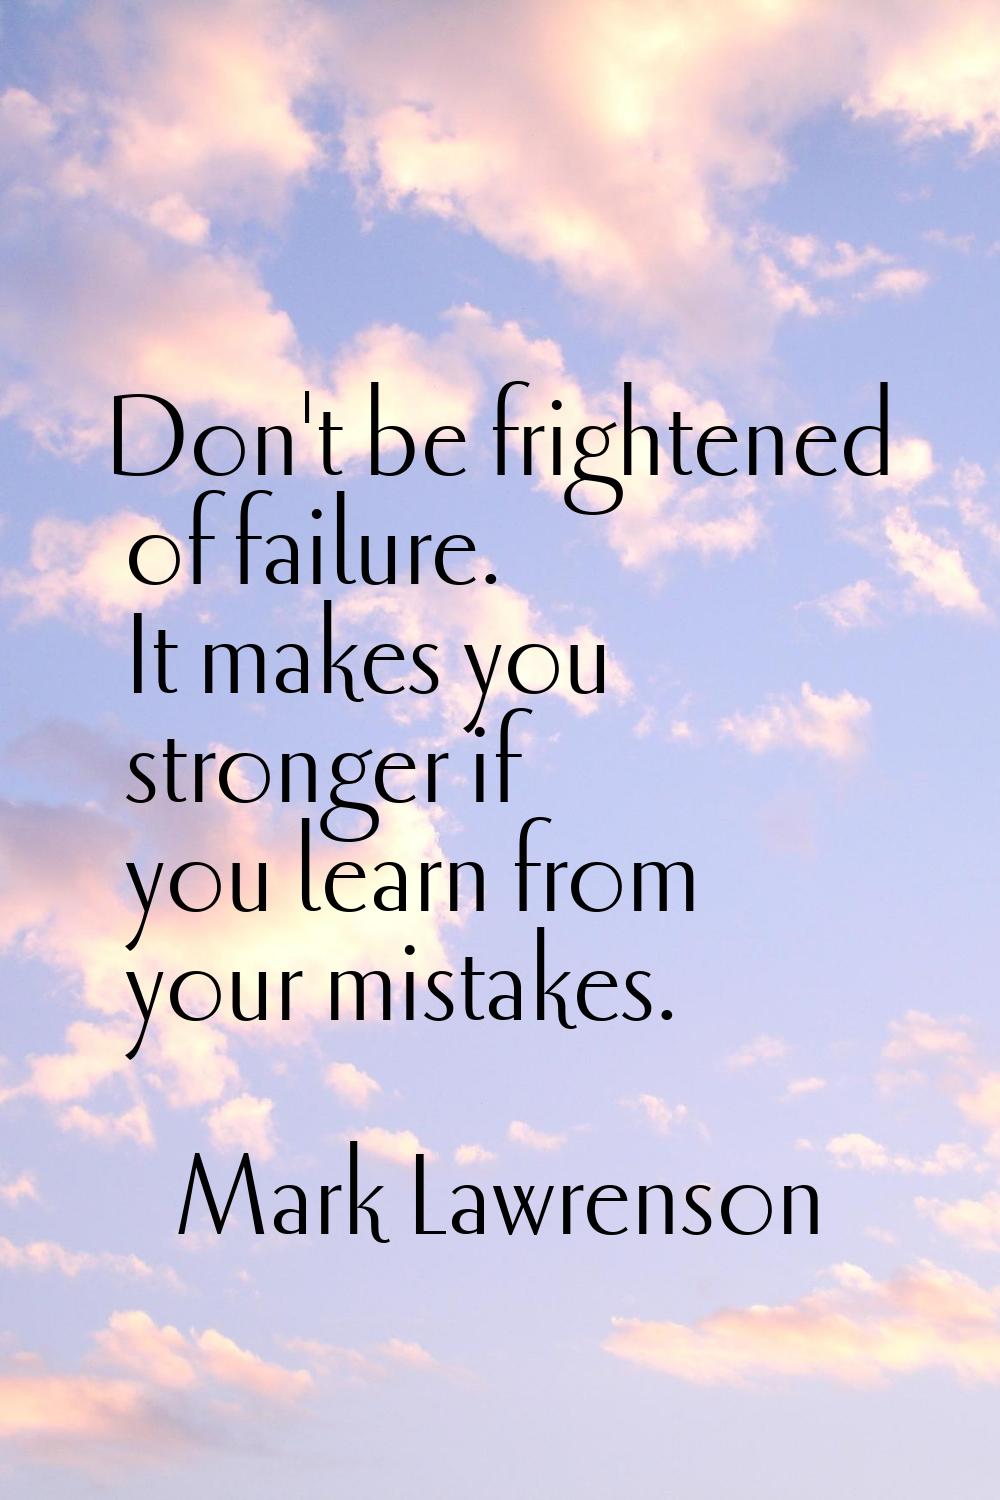 Don't be frightened of failure. It makes you stronger if you learn from your mistakes.